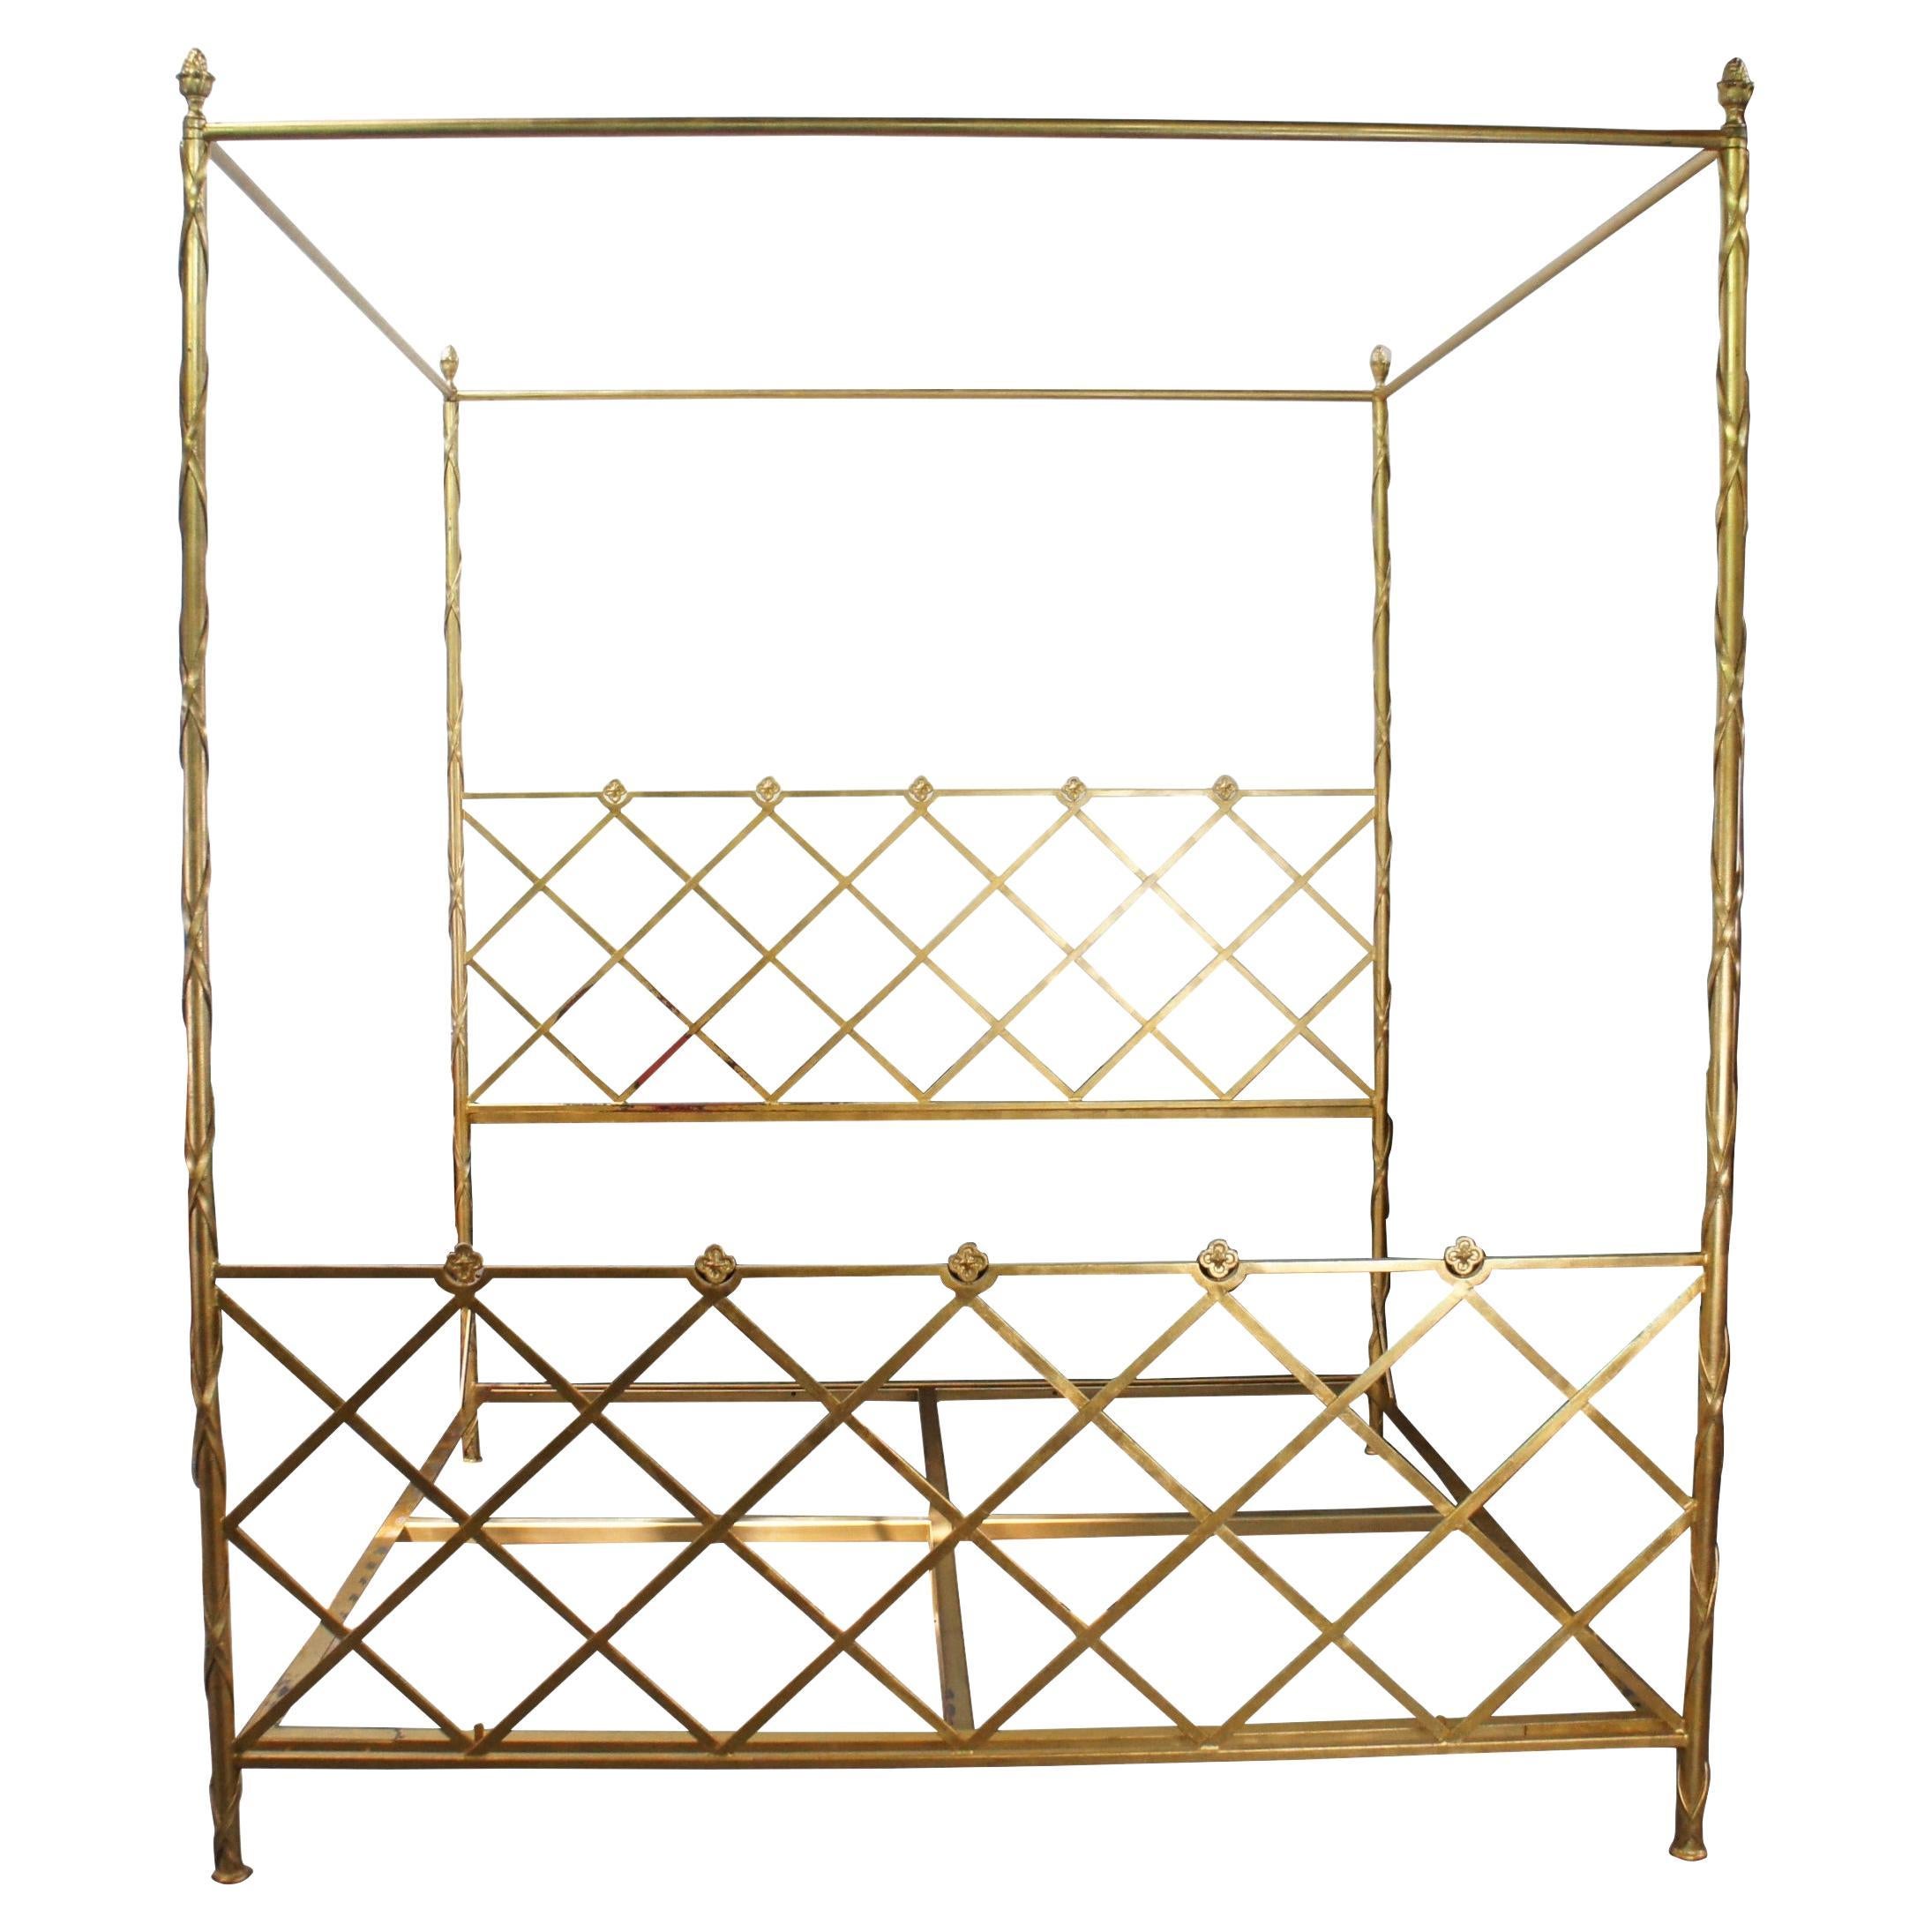 Vintage Neoclassical Modernity Gold Leaf King Size Poster Bed Lattice Tester Canopy